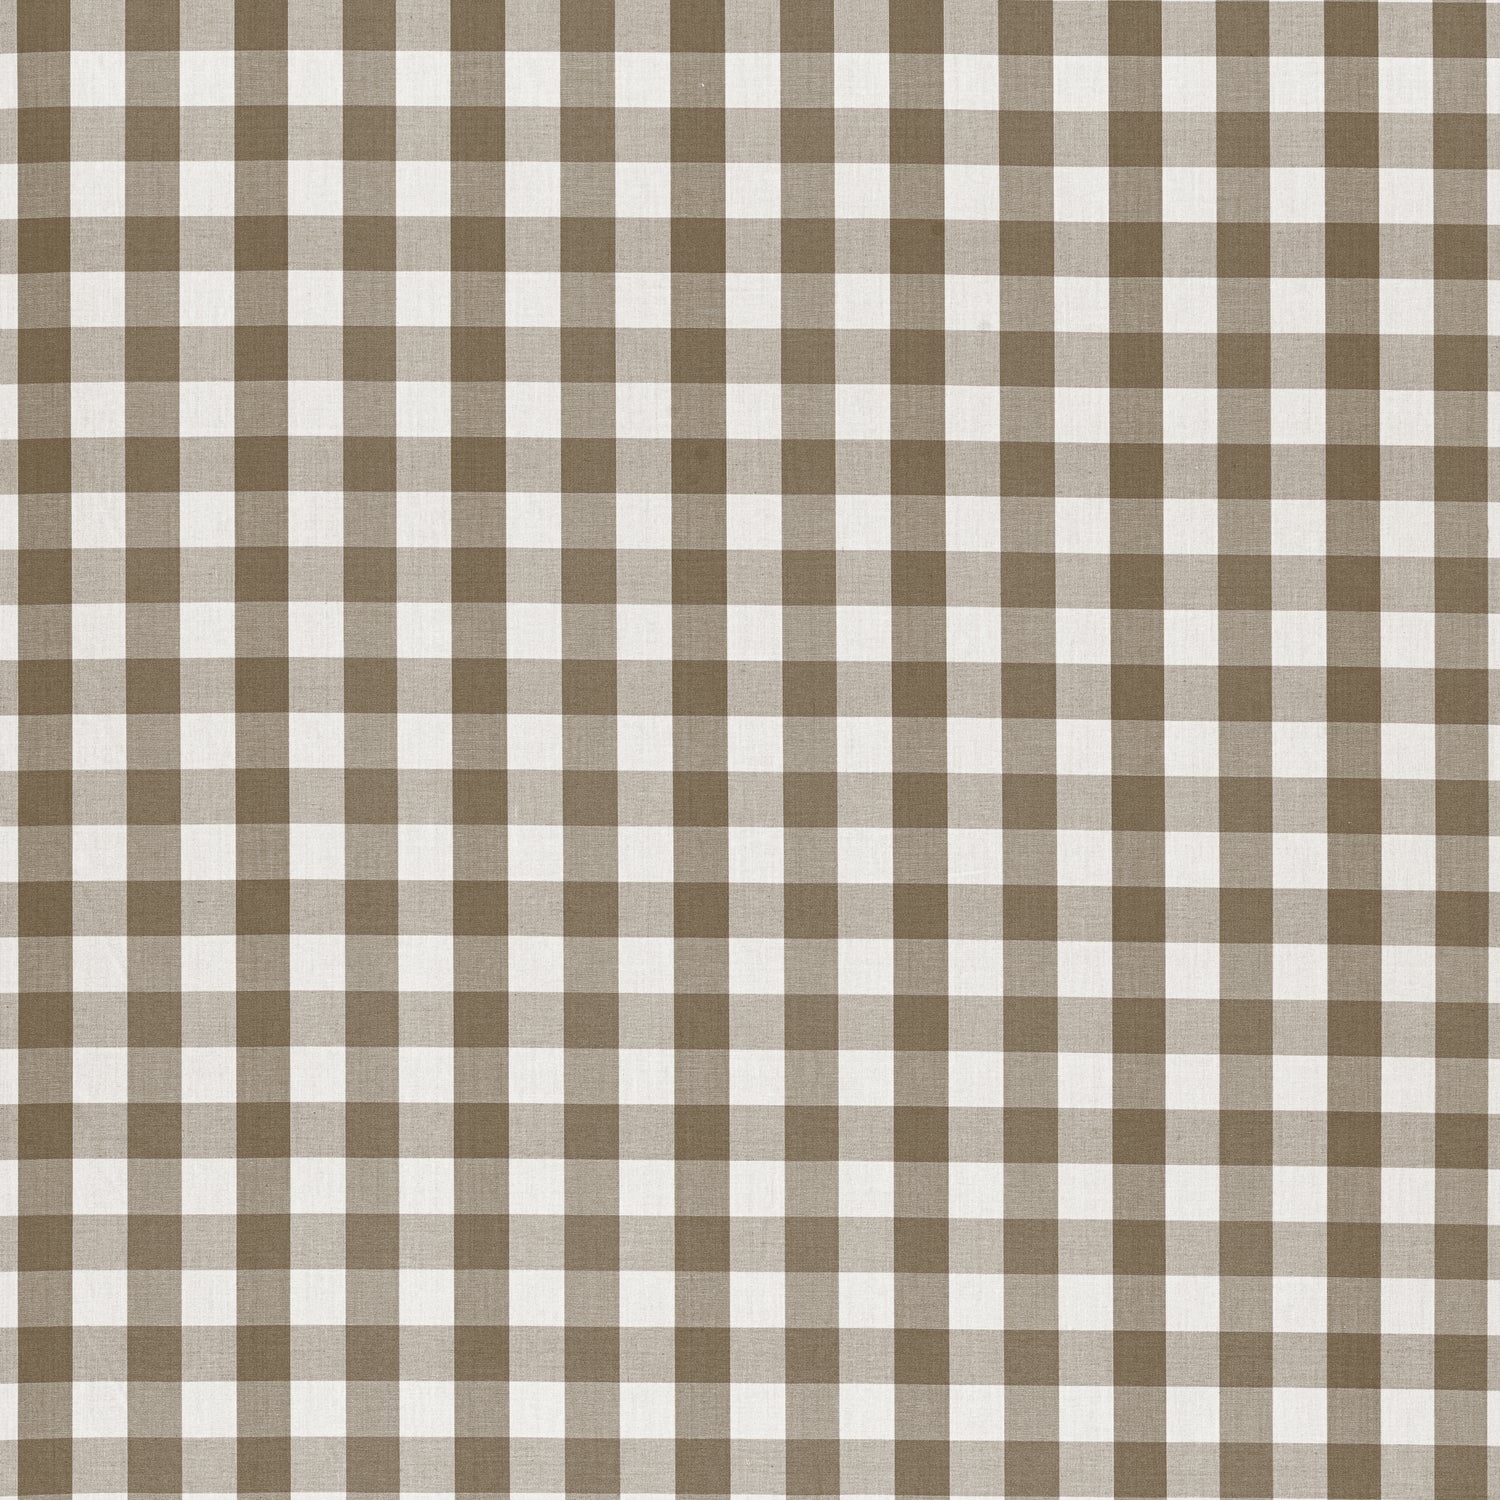 Saybrook Check fabric in brown color - pattern number AW15144 - by Anna French in the Antilles collection